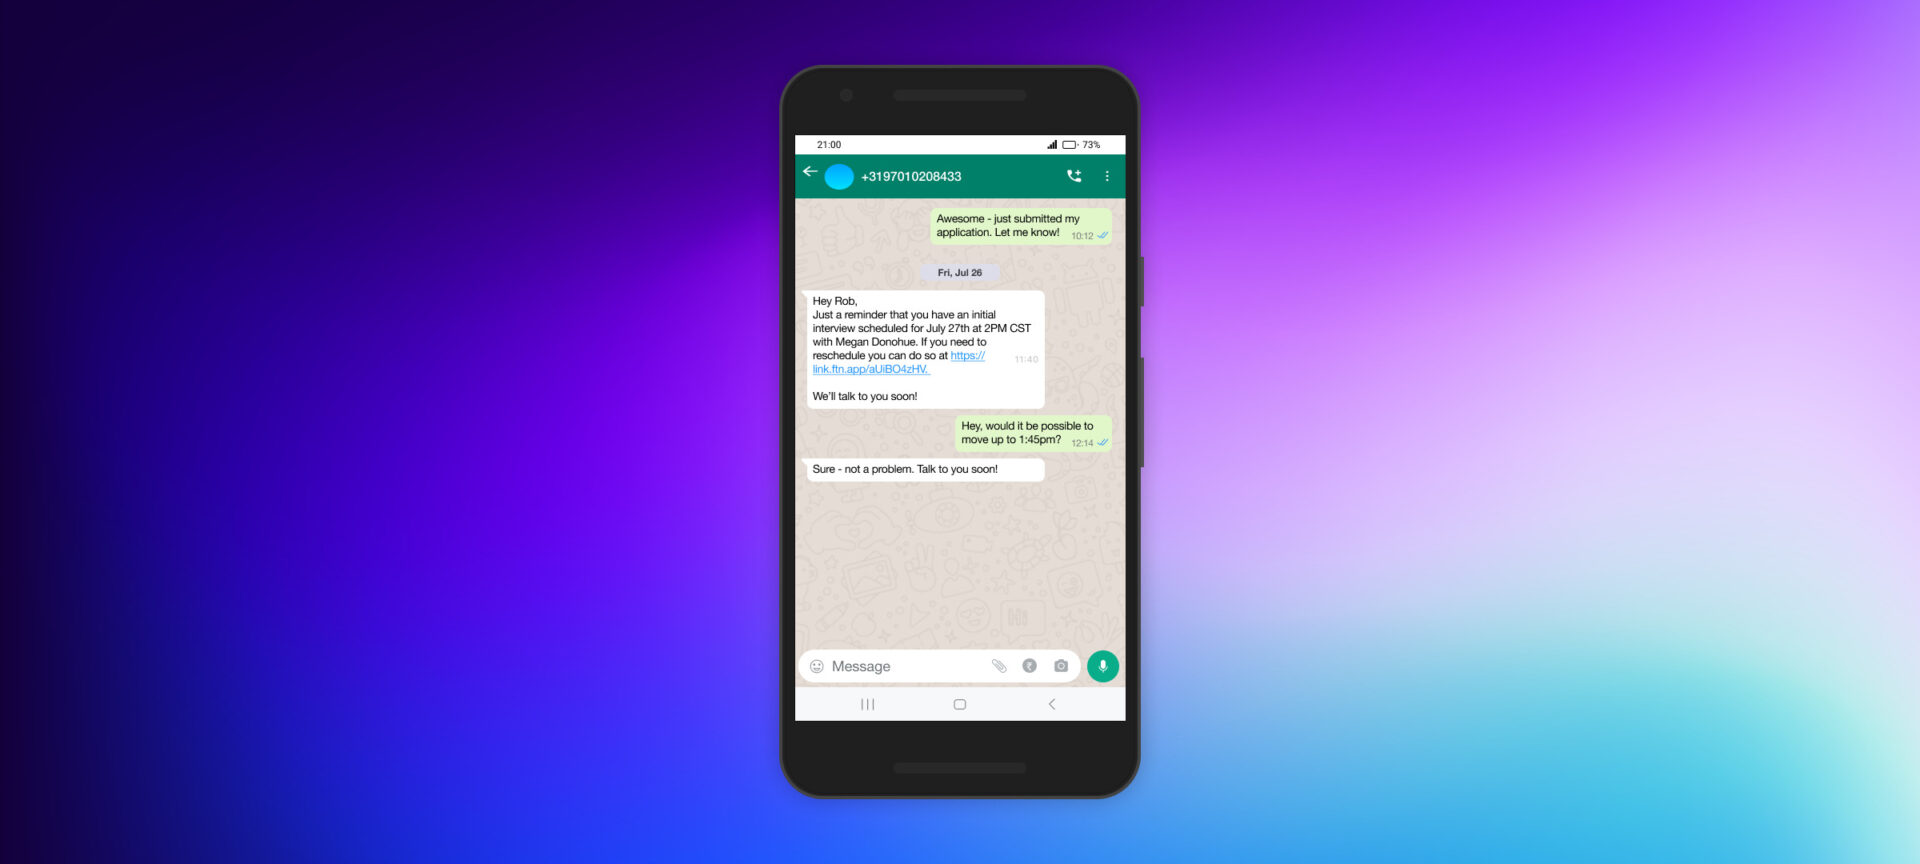 Engage applicants globally with Fountain’s WhatsApp integration